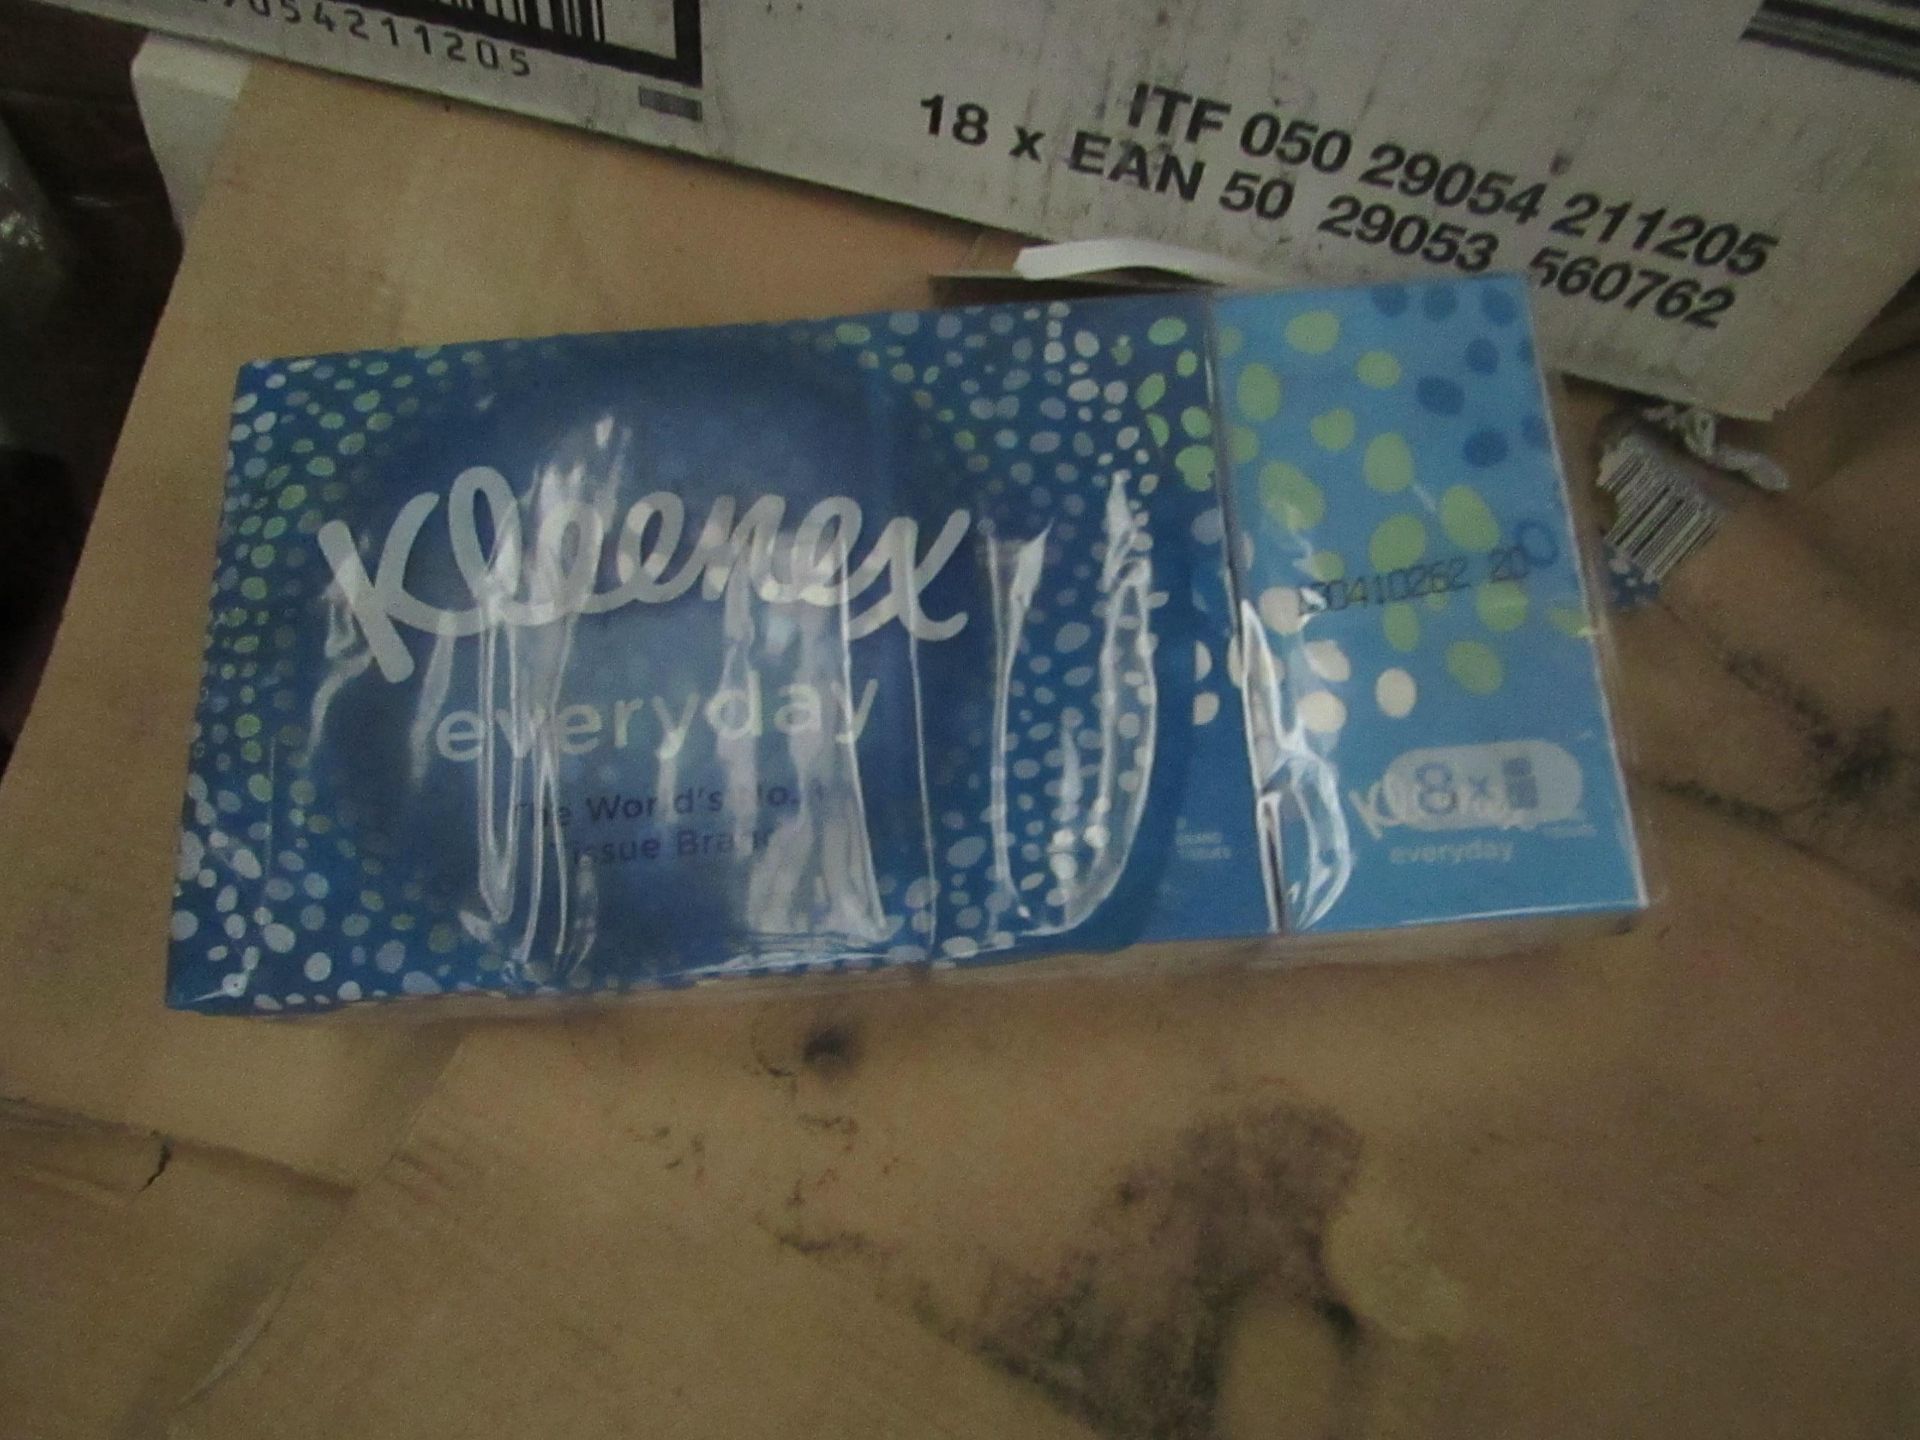 A Box Container 18x Packs Kleenex tissues - Each pack has 8 packs of 9 sheets in them, the outer